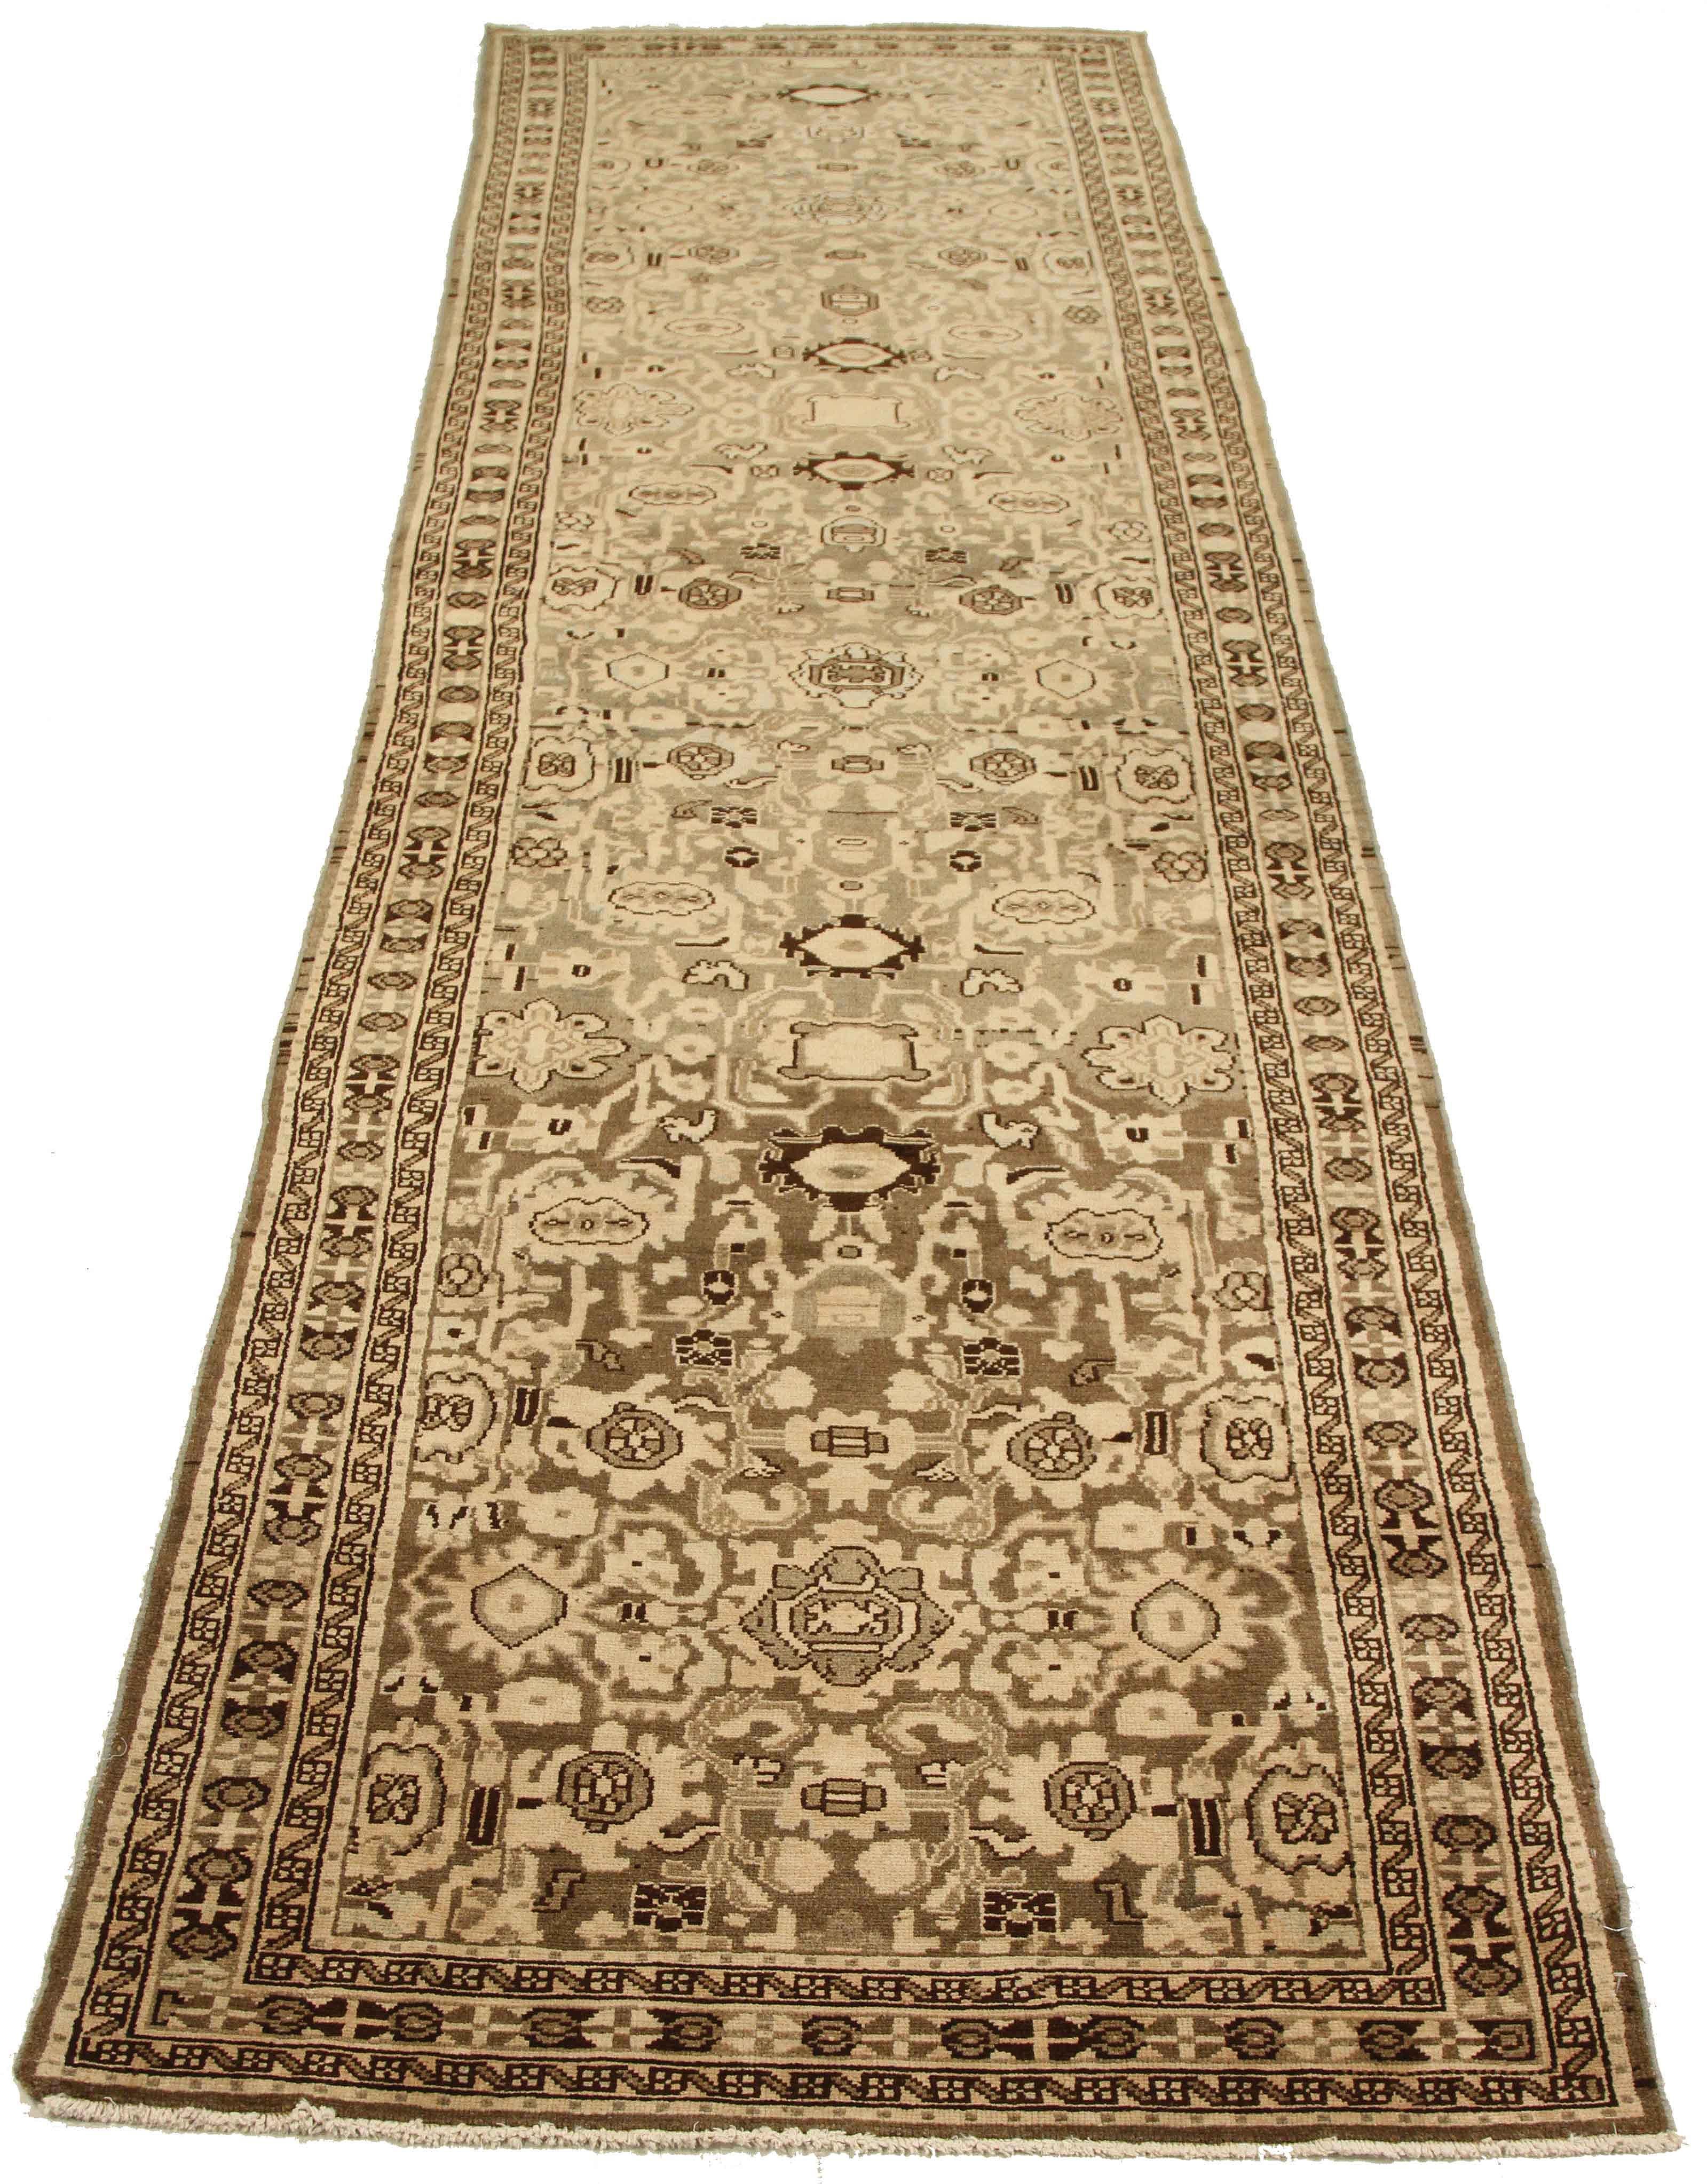 Antique Persian runner rug handwoven from the finest sheep’s wool. It’s colored with all-natural vegetable dyes that are safe for humans and pets. It’s a traditional Malayer design featuring floral details on an ivory field. It’s a lovely piece to